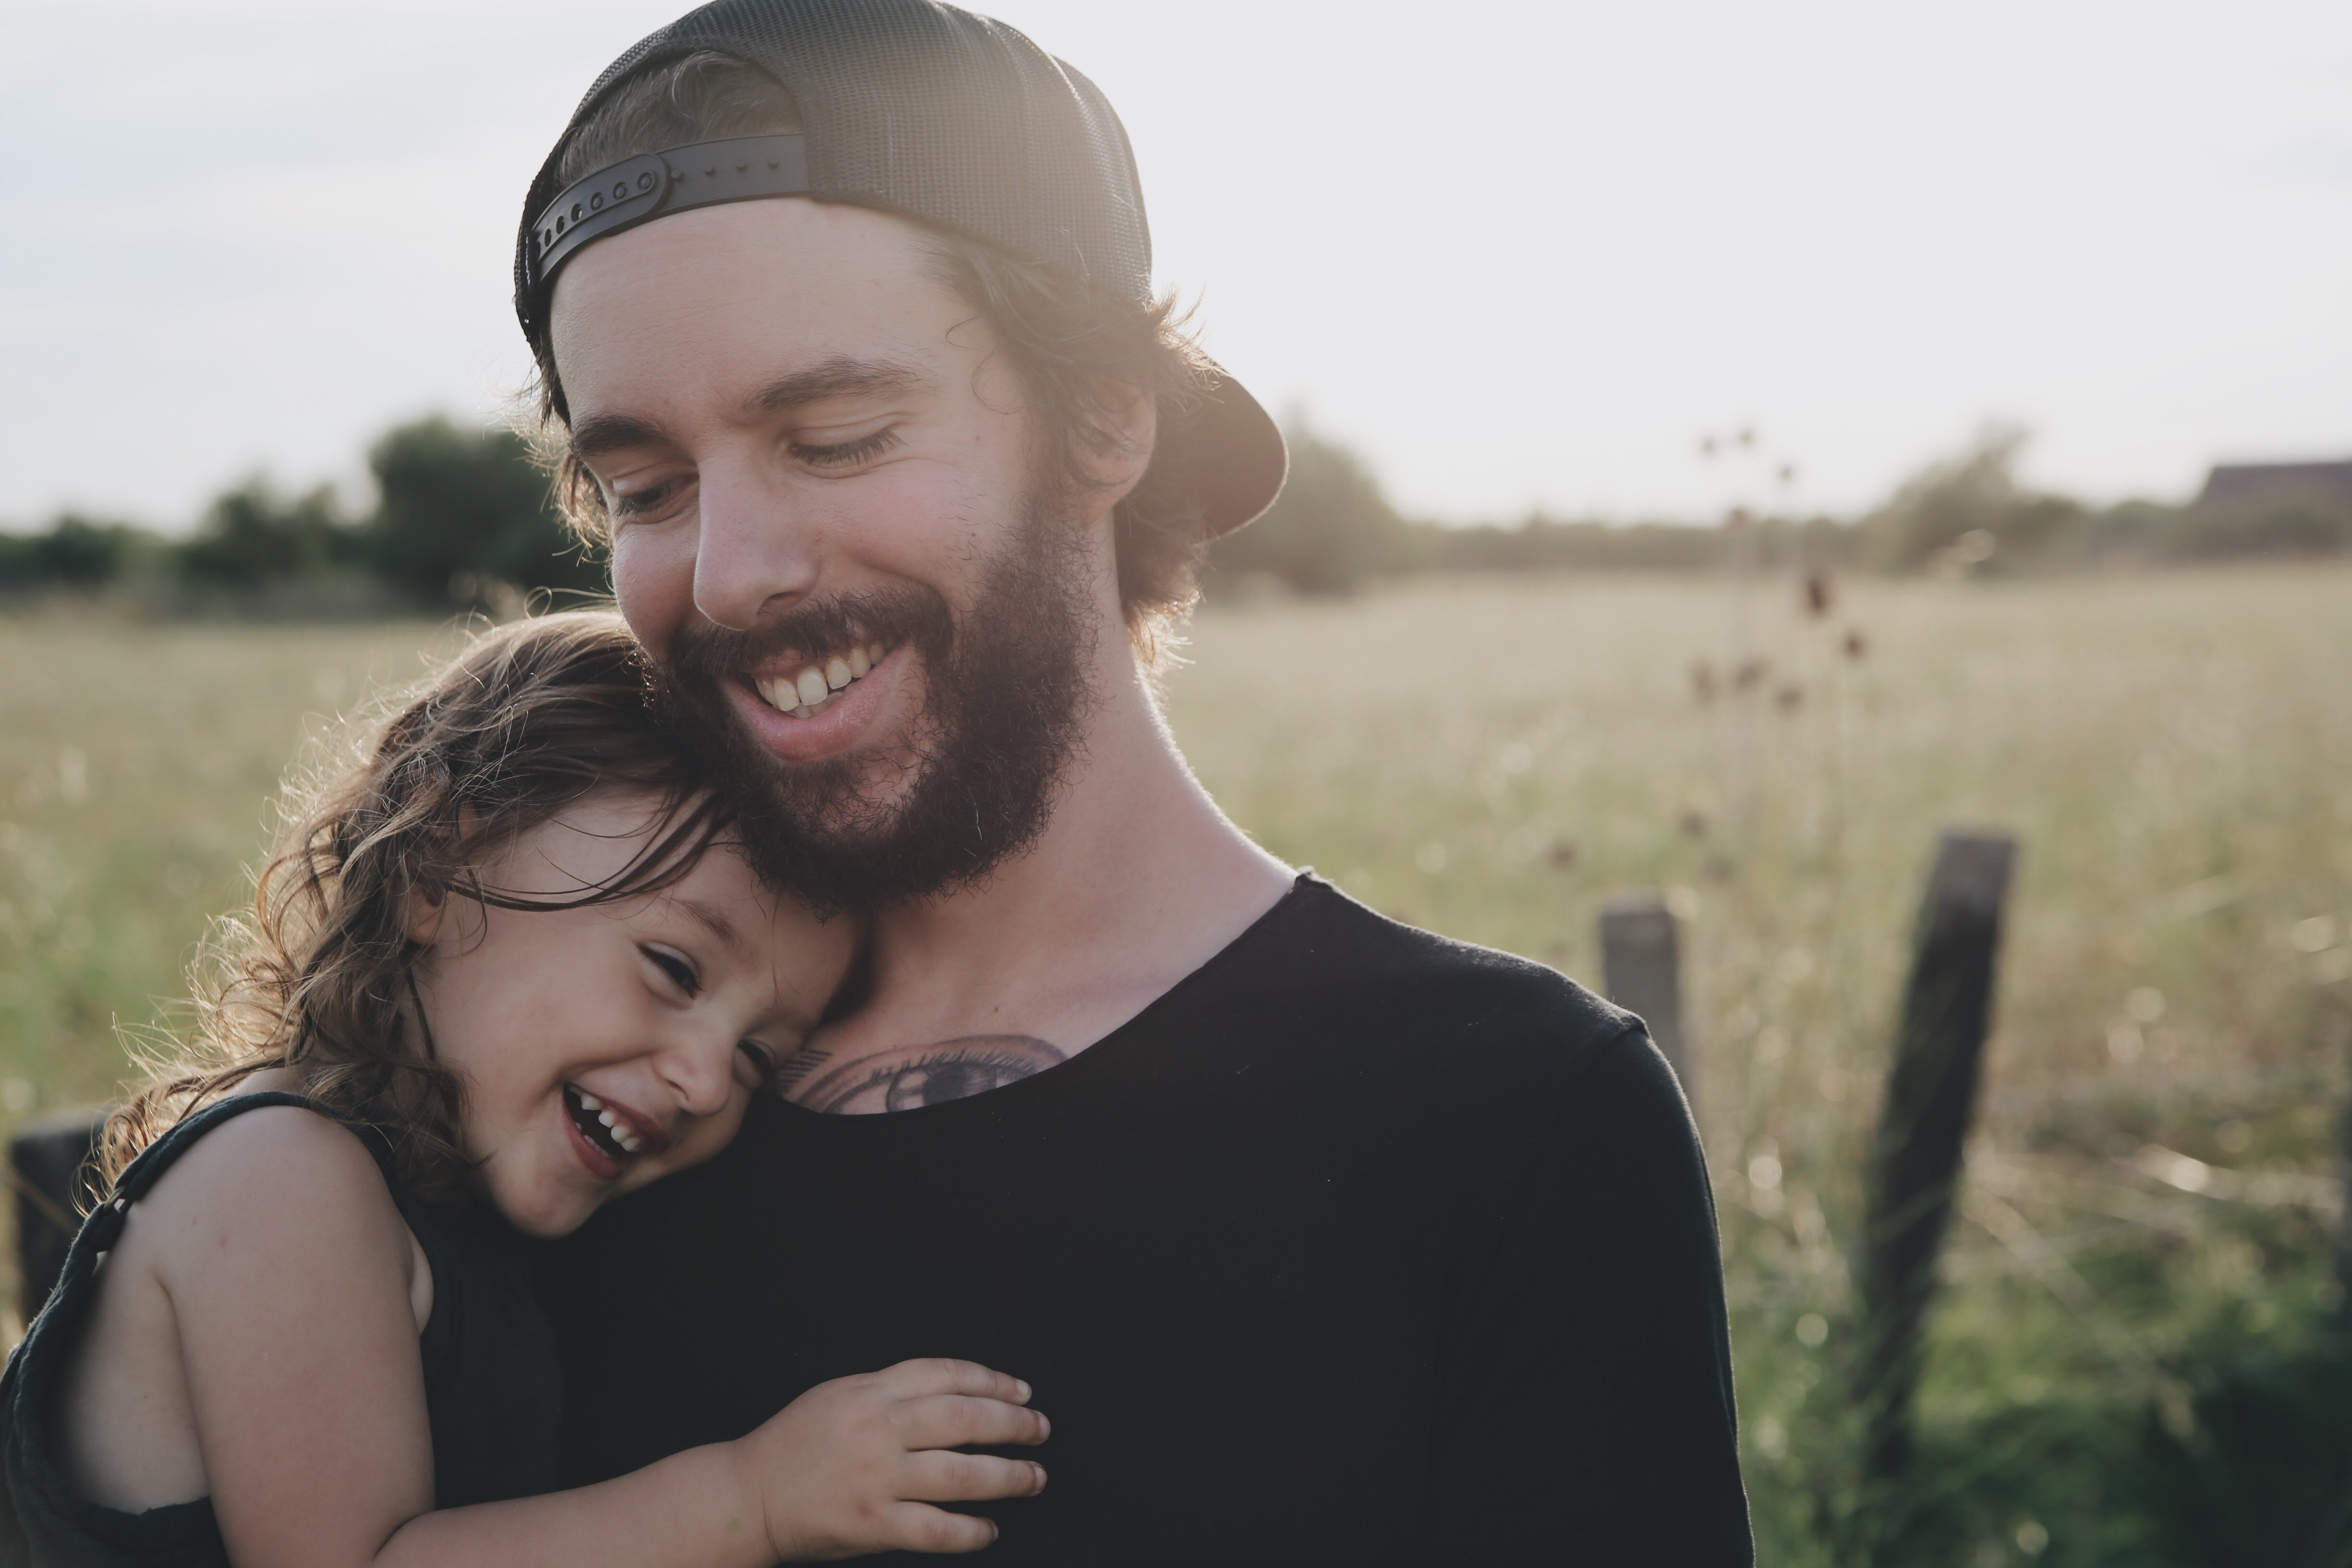 Ben was a doting dad who put his daughter first. | Source: Unsplash